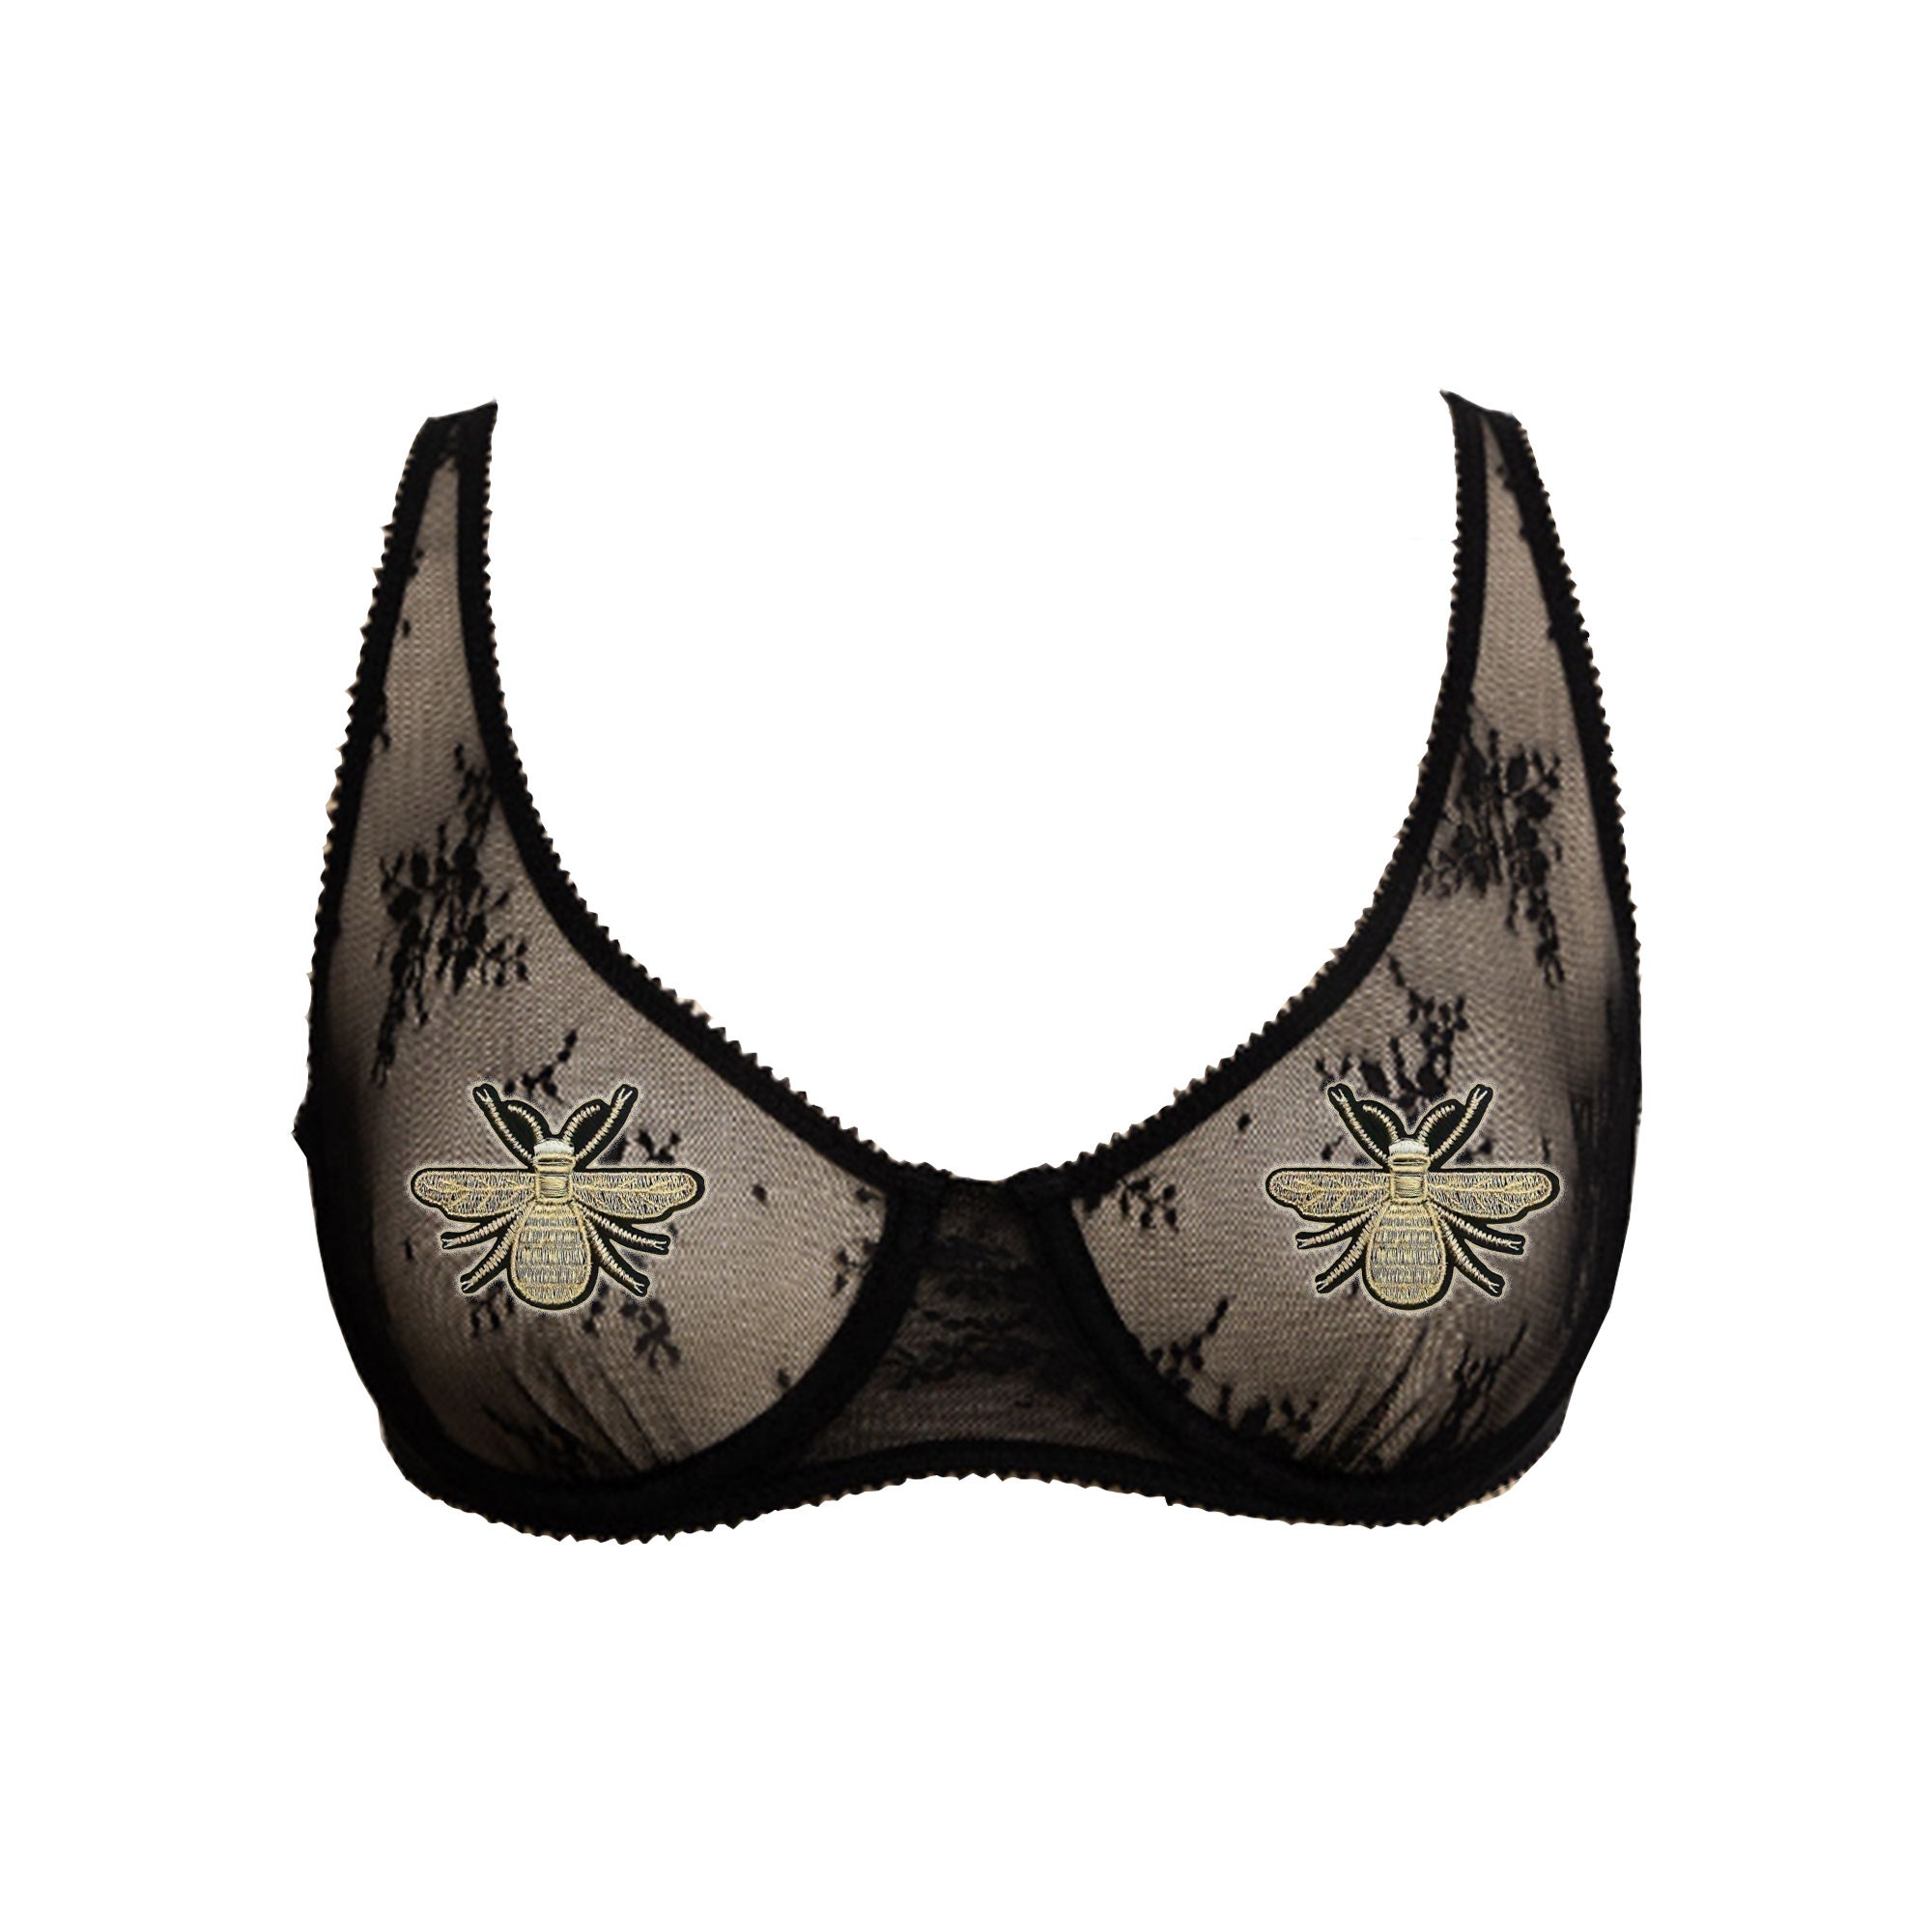 Sheer Mesh Bralette Bee Applique Patches Pasties Black Sheer Triangle  Bralette Applique Bra W Adjustable Straps Embroidered Bumblebee Bra 